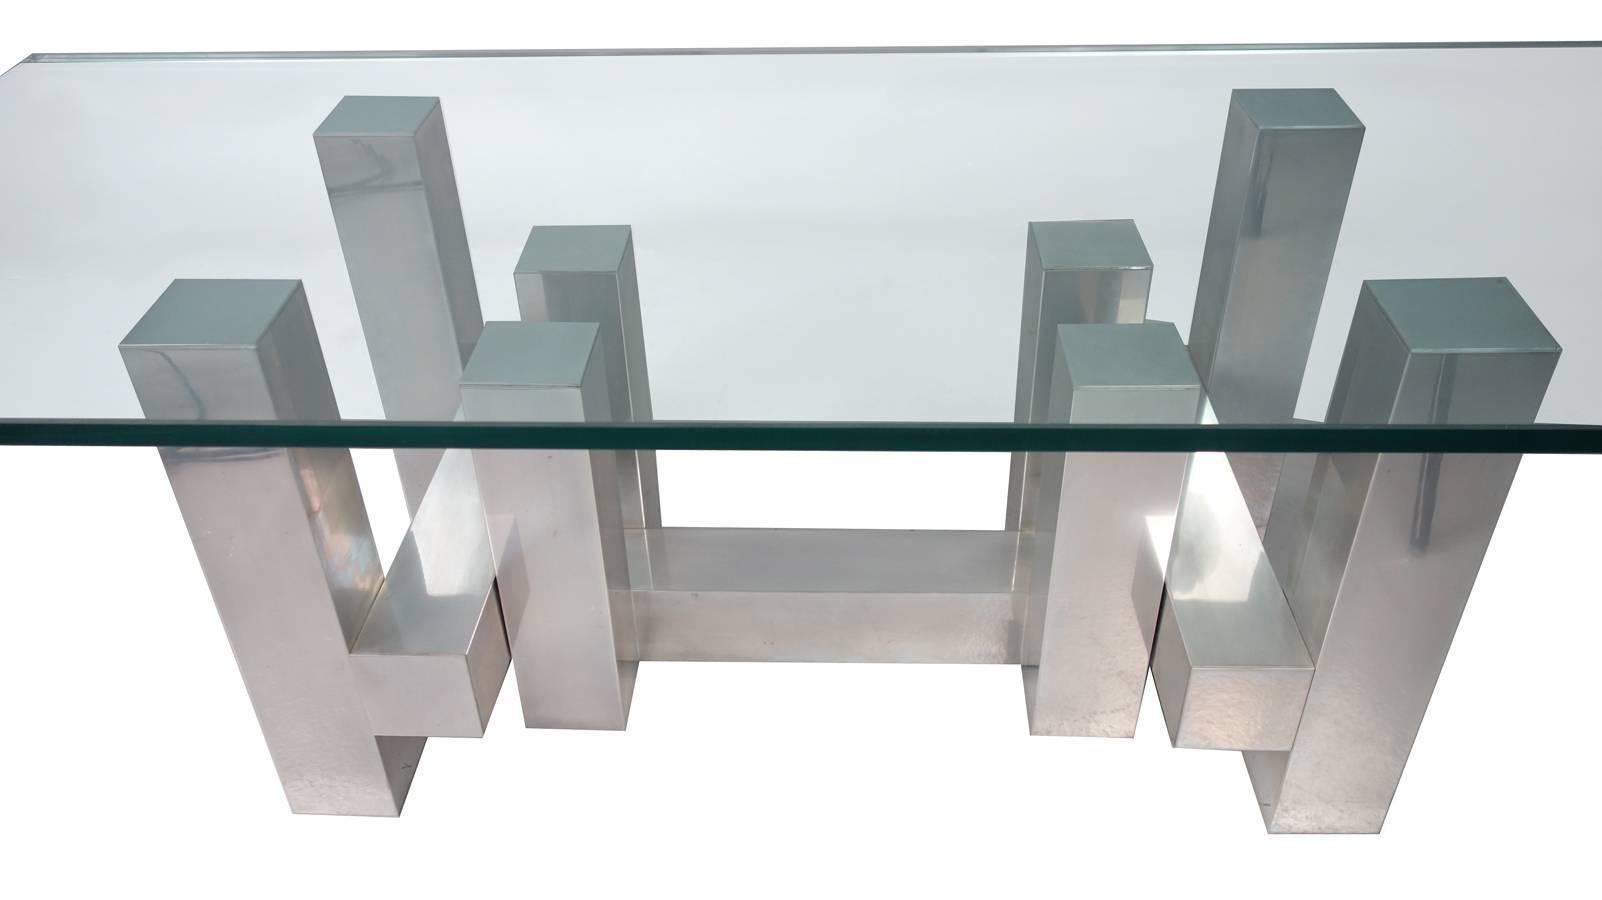 Wonderful architectural coffee table designed by Paul Mayen.
Similar style Paul Evans, this design has a more sleek refined look. A fine example showing minimal wear

Measurement is of the glass top.
base is 30'' x 15''. 